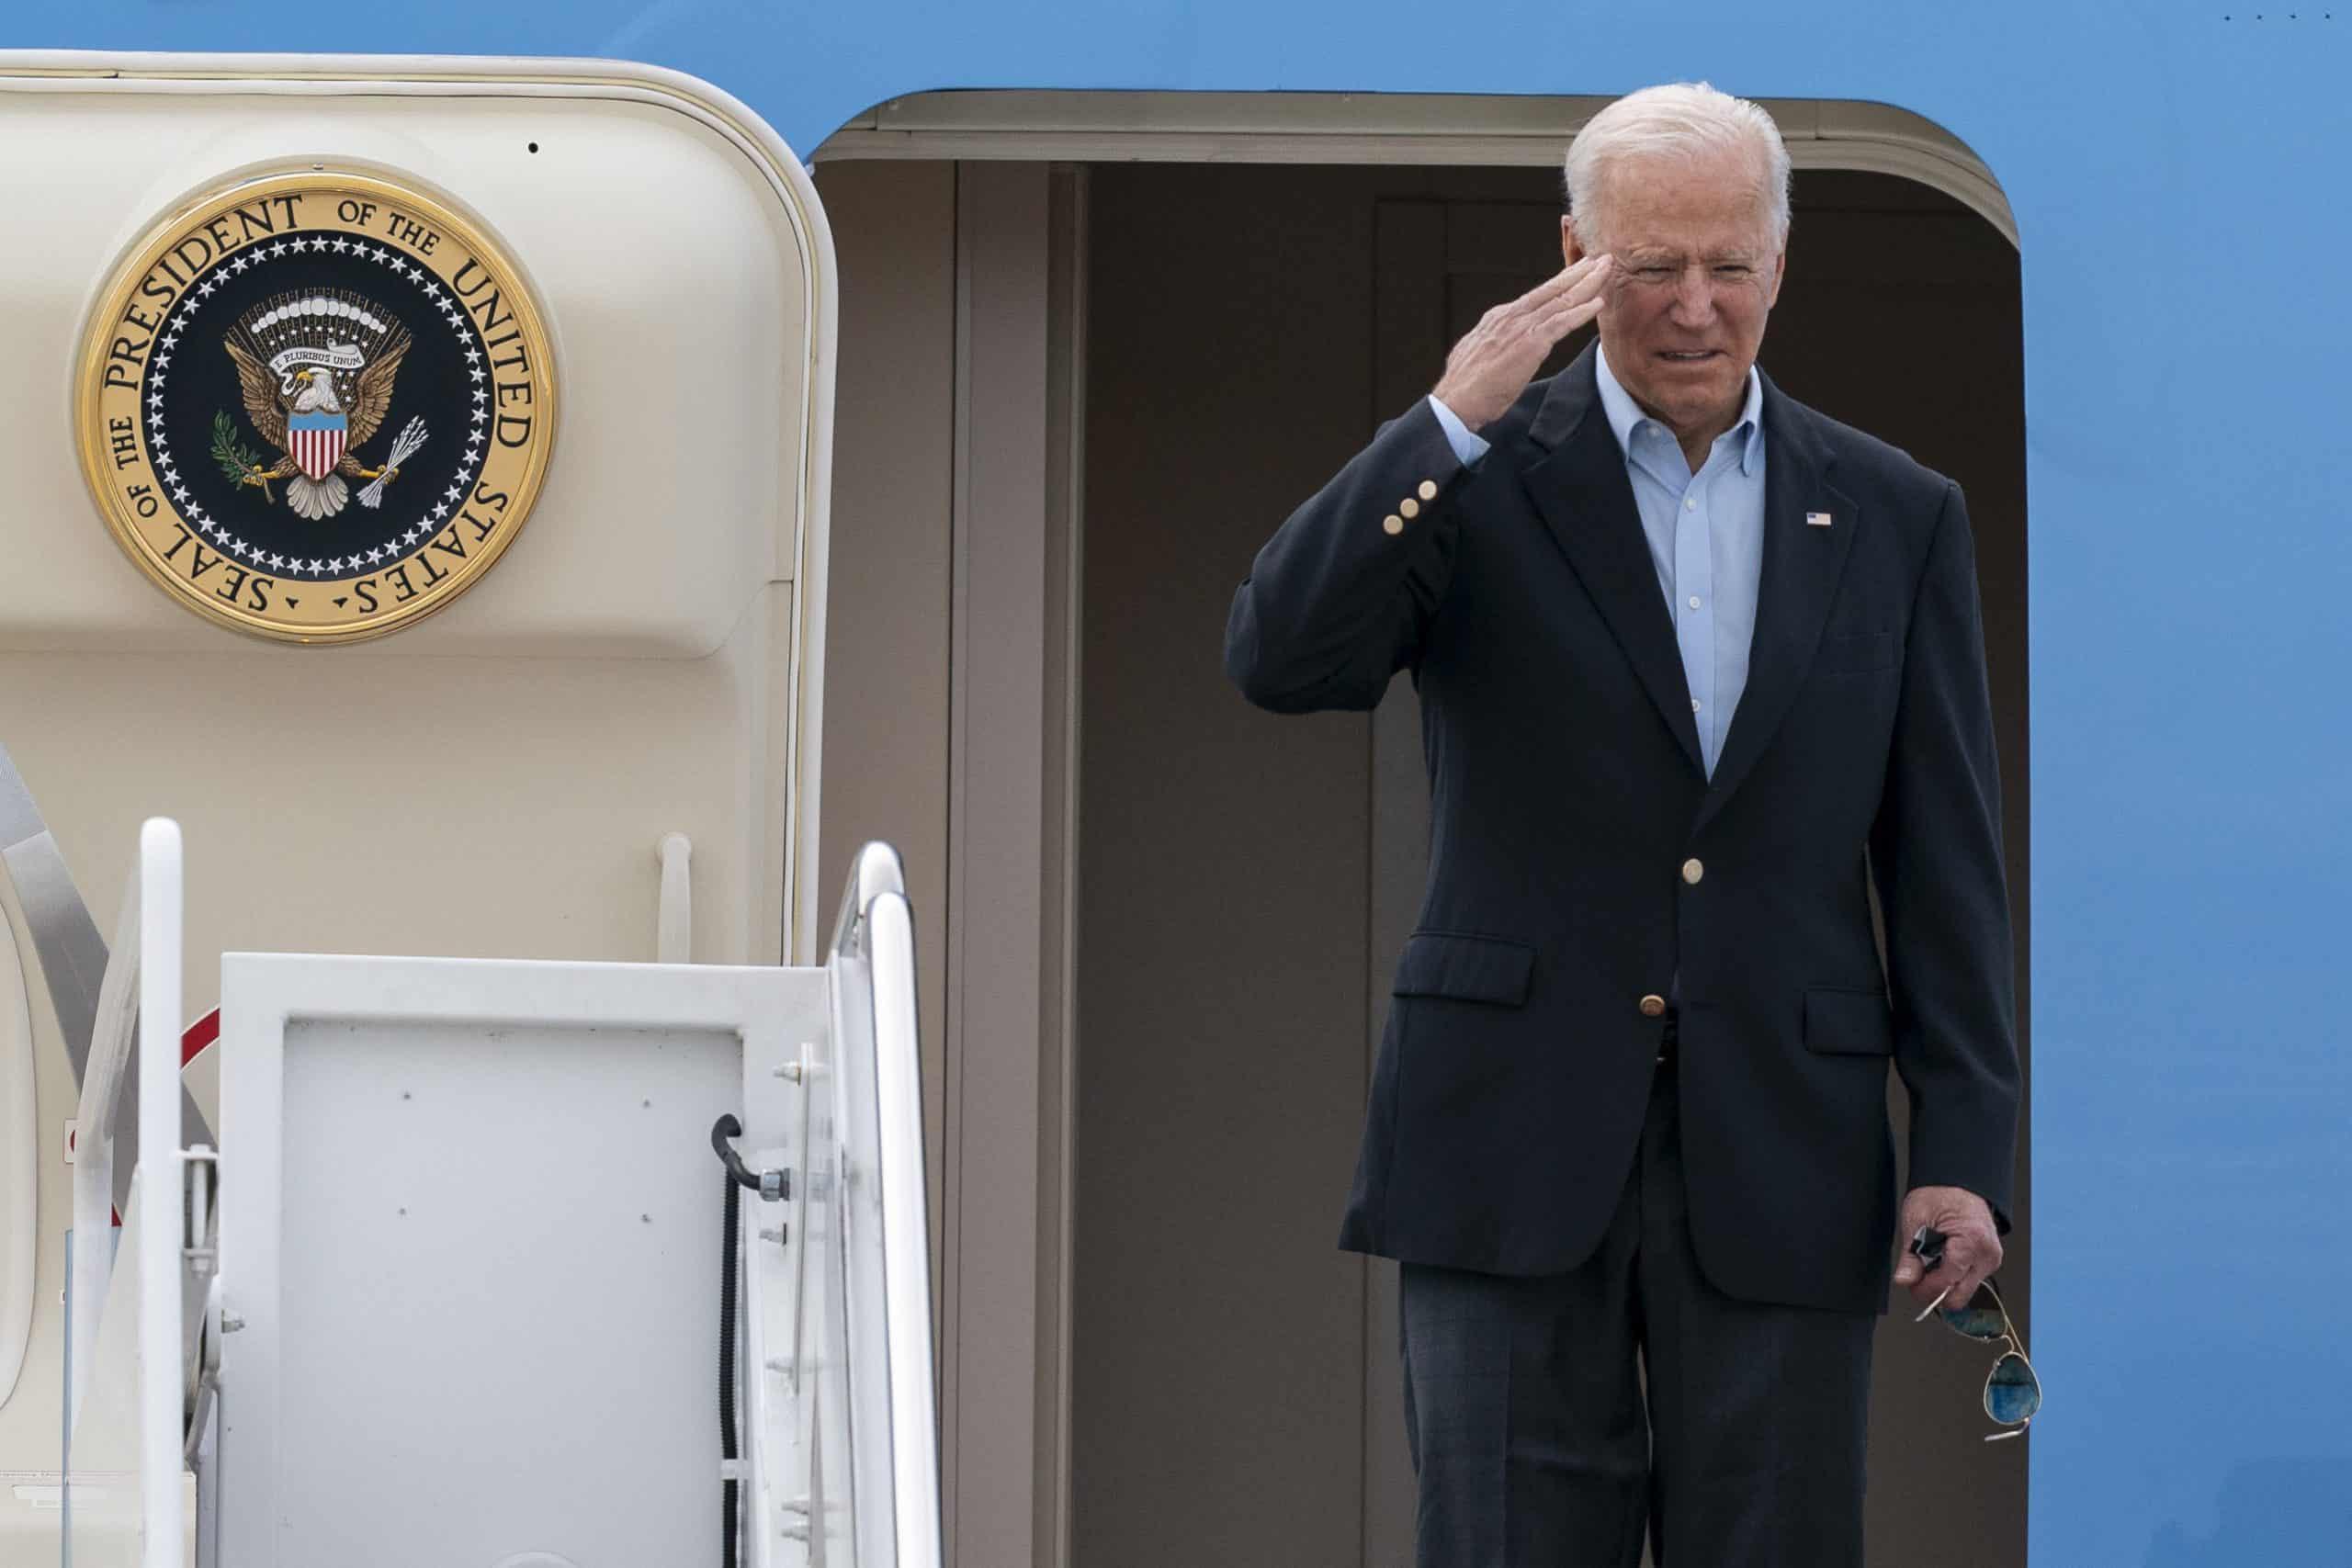 Biden holds ‘very deep’ concerns over Brexit as he jets to Cornwall for G7